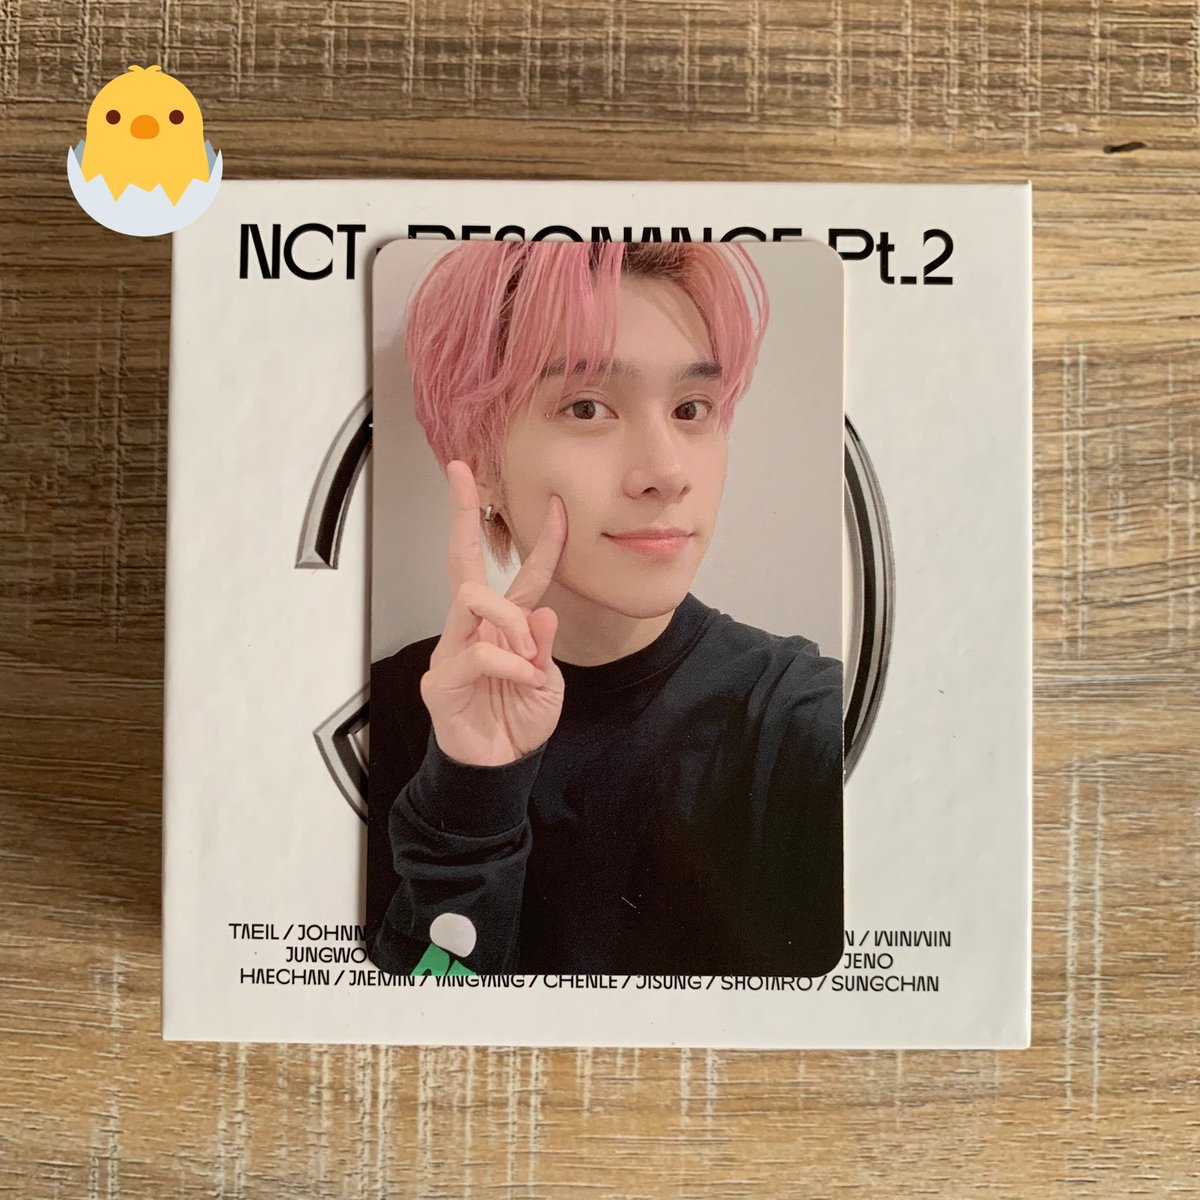  #WBBRSPH_Onhand NCT RESONANCE PART 2 KITS₱850- Unsealed but complete inclusions- Can choose member- Pc is clean and in good condition- 3 stocks